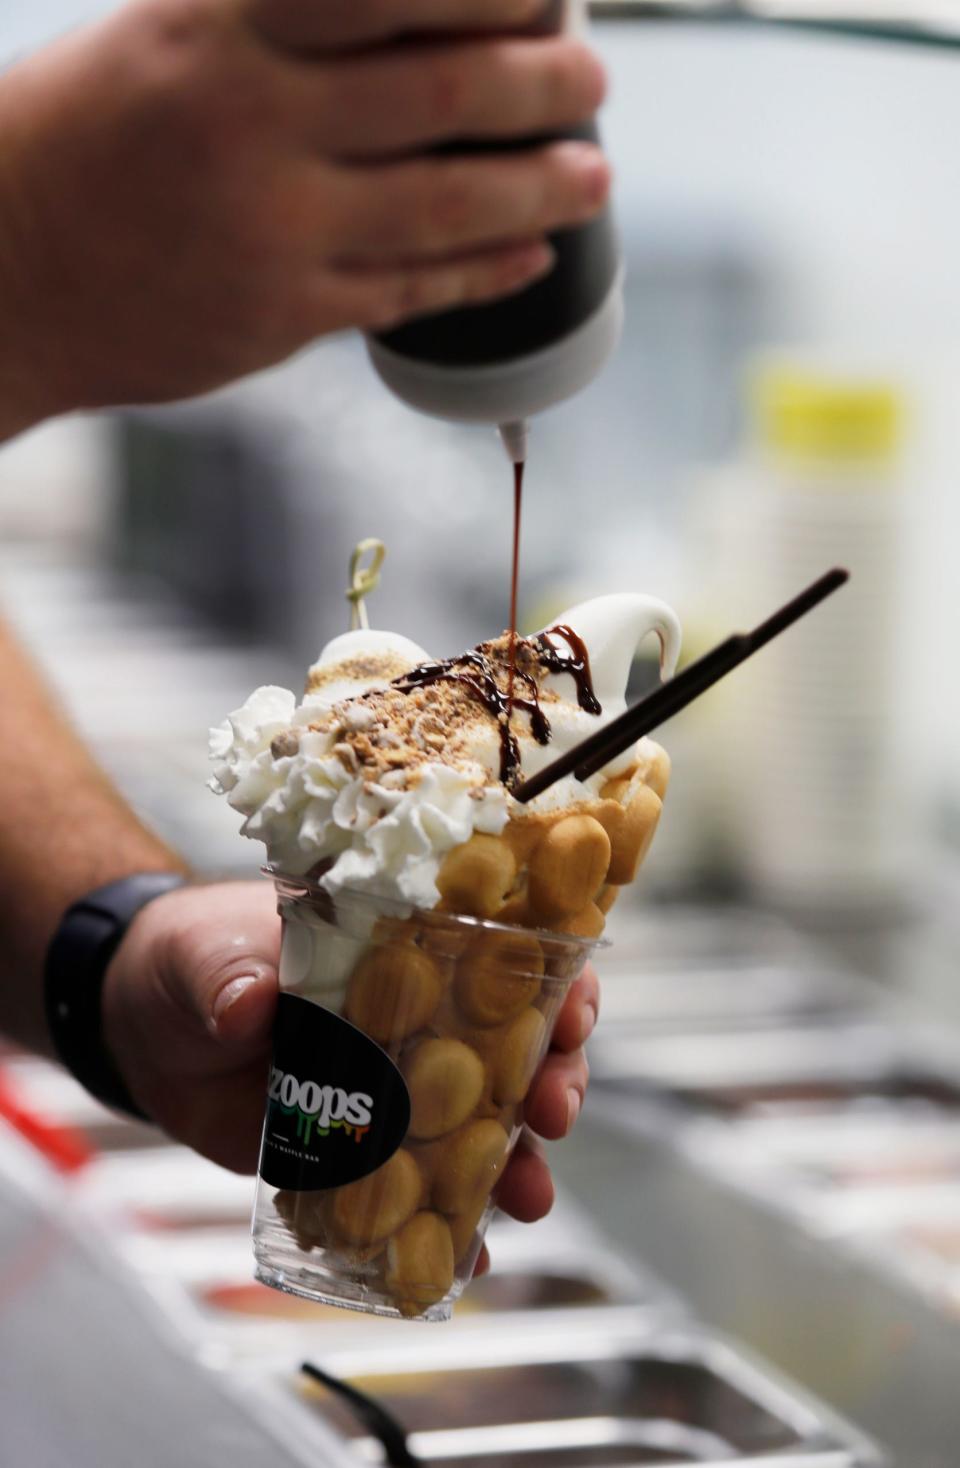 Darren Hussien, co-owner of Gazoops Ice Cream and Waffle Bar in Cape Coral, adds chocolate syrup while preparing a sample product.